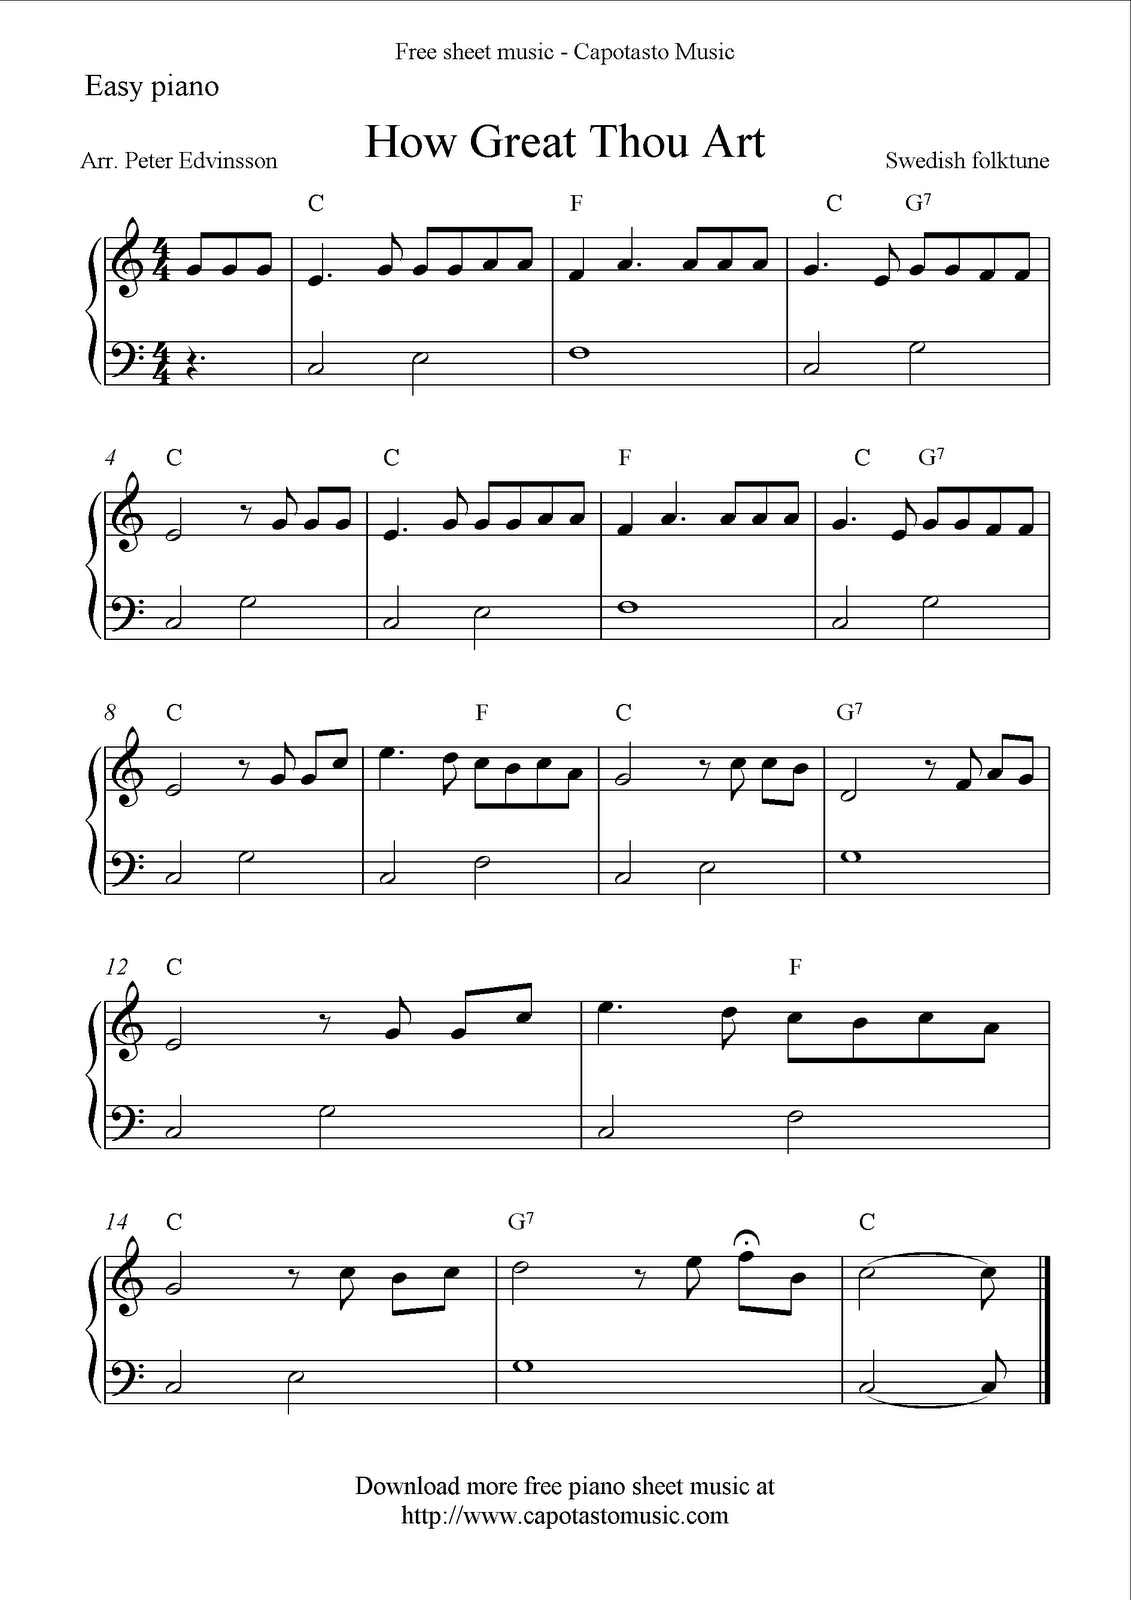 Free Sheet Music Pages &amp;amp; Guitar Lessons | Orchestra | Pinterest - Free Piano Sheet Music Online Printable Popular Songs